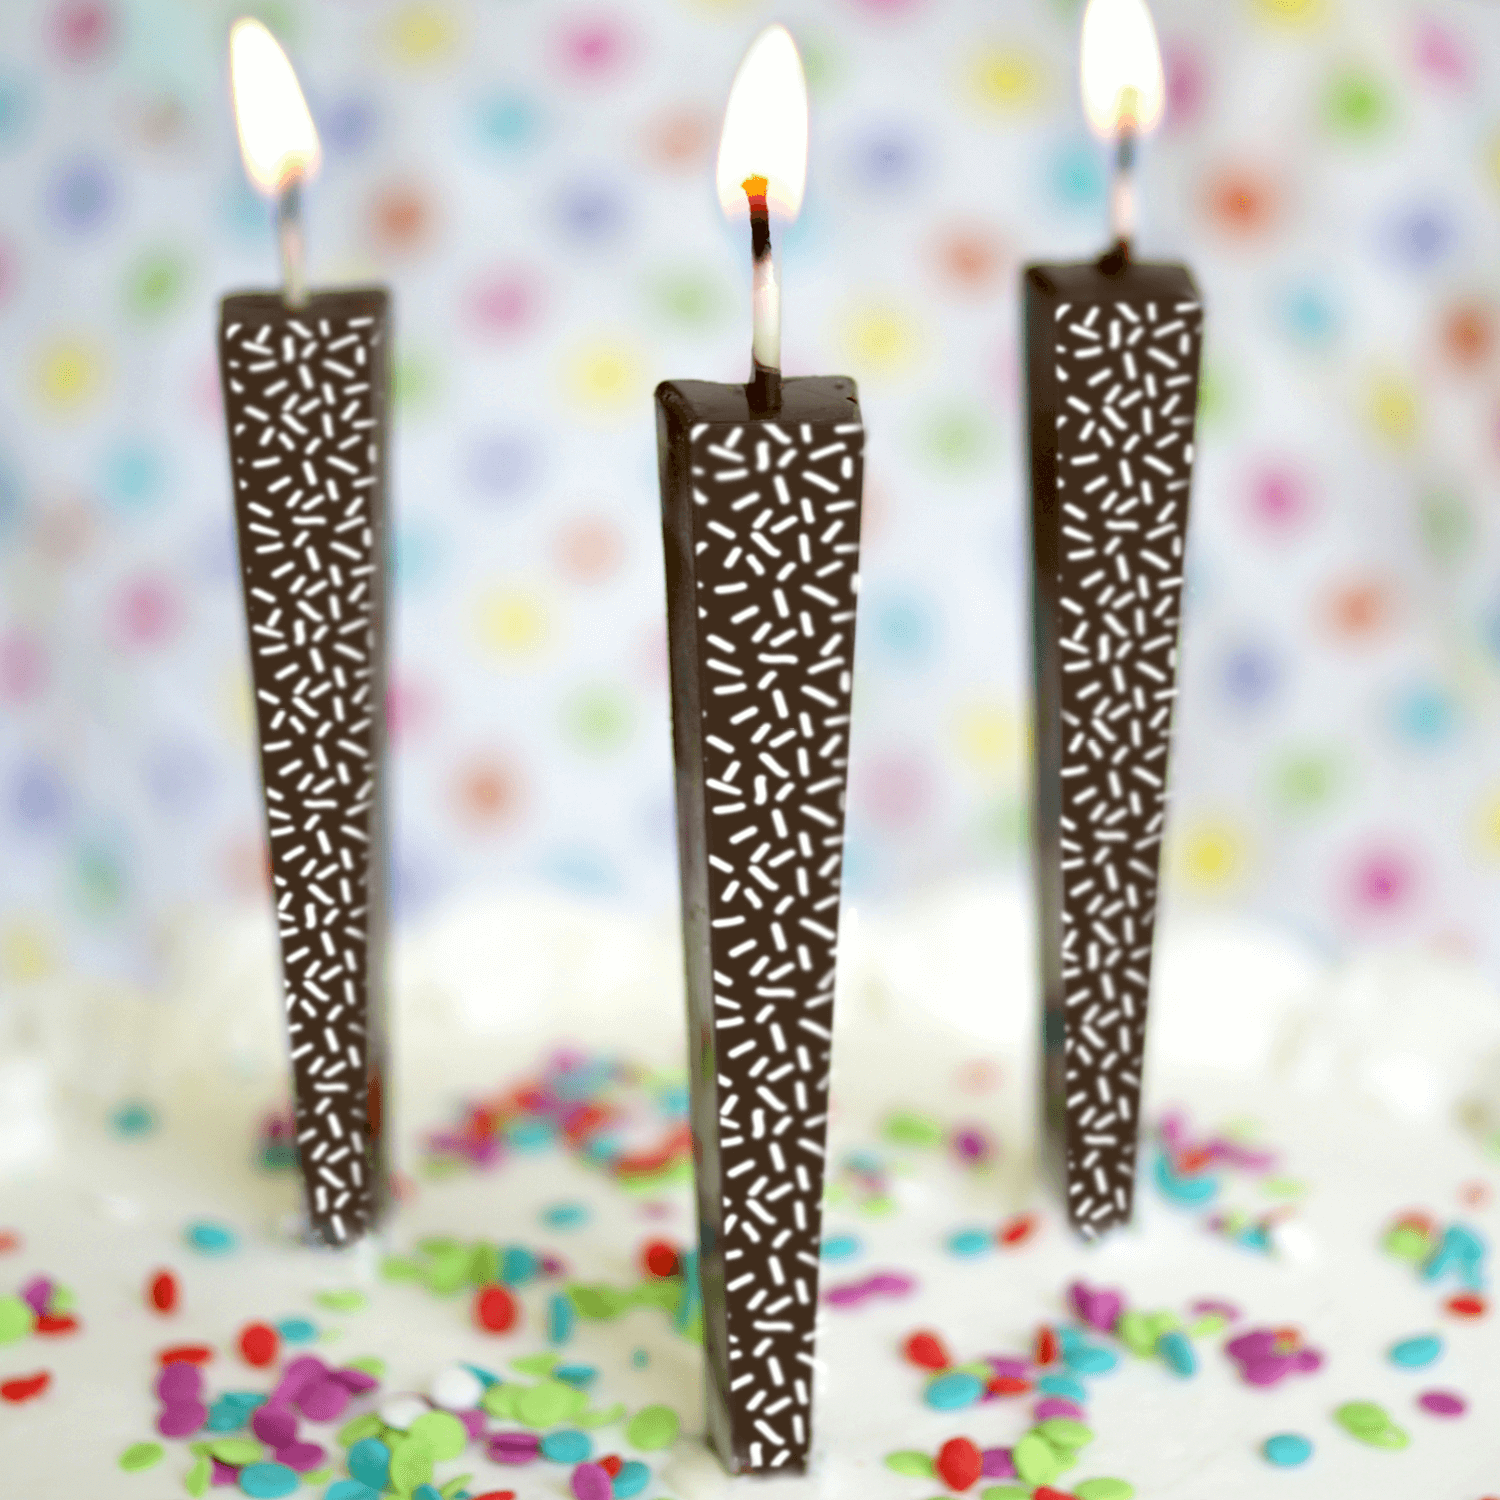 Edible Dark Chocolate Candles with white sprinkles on cake with sprinkles | Let Them Eat Candles